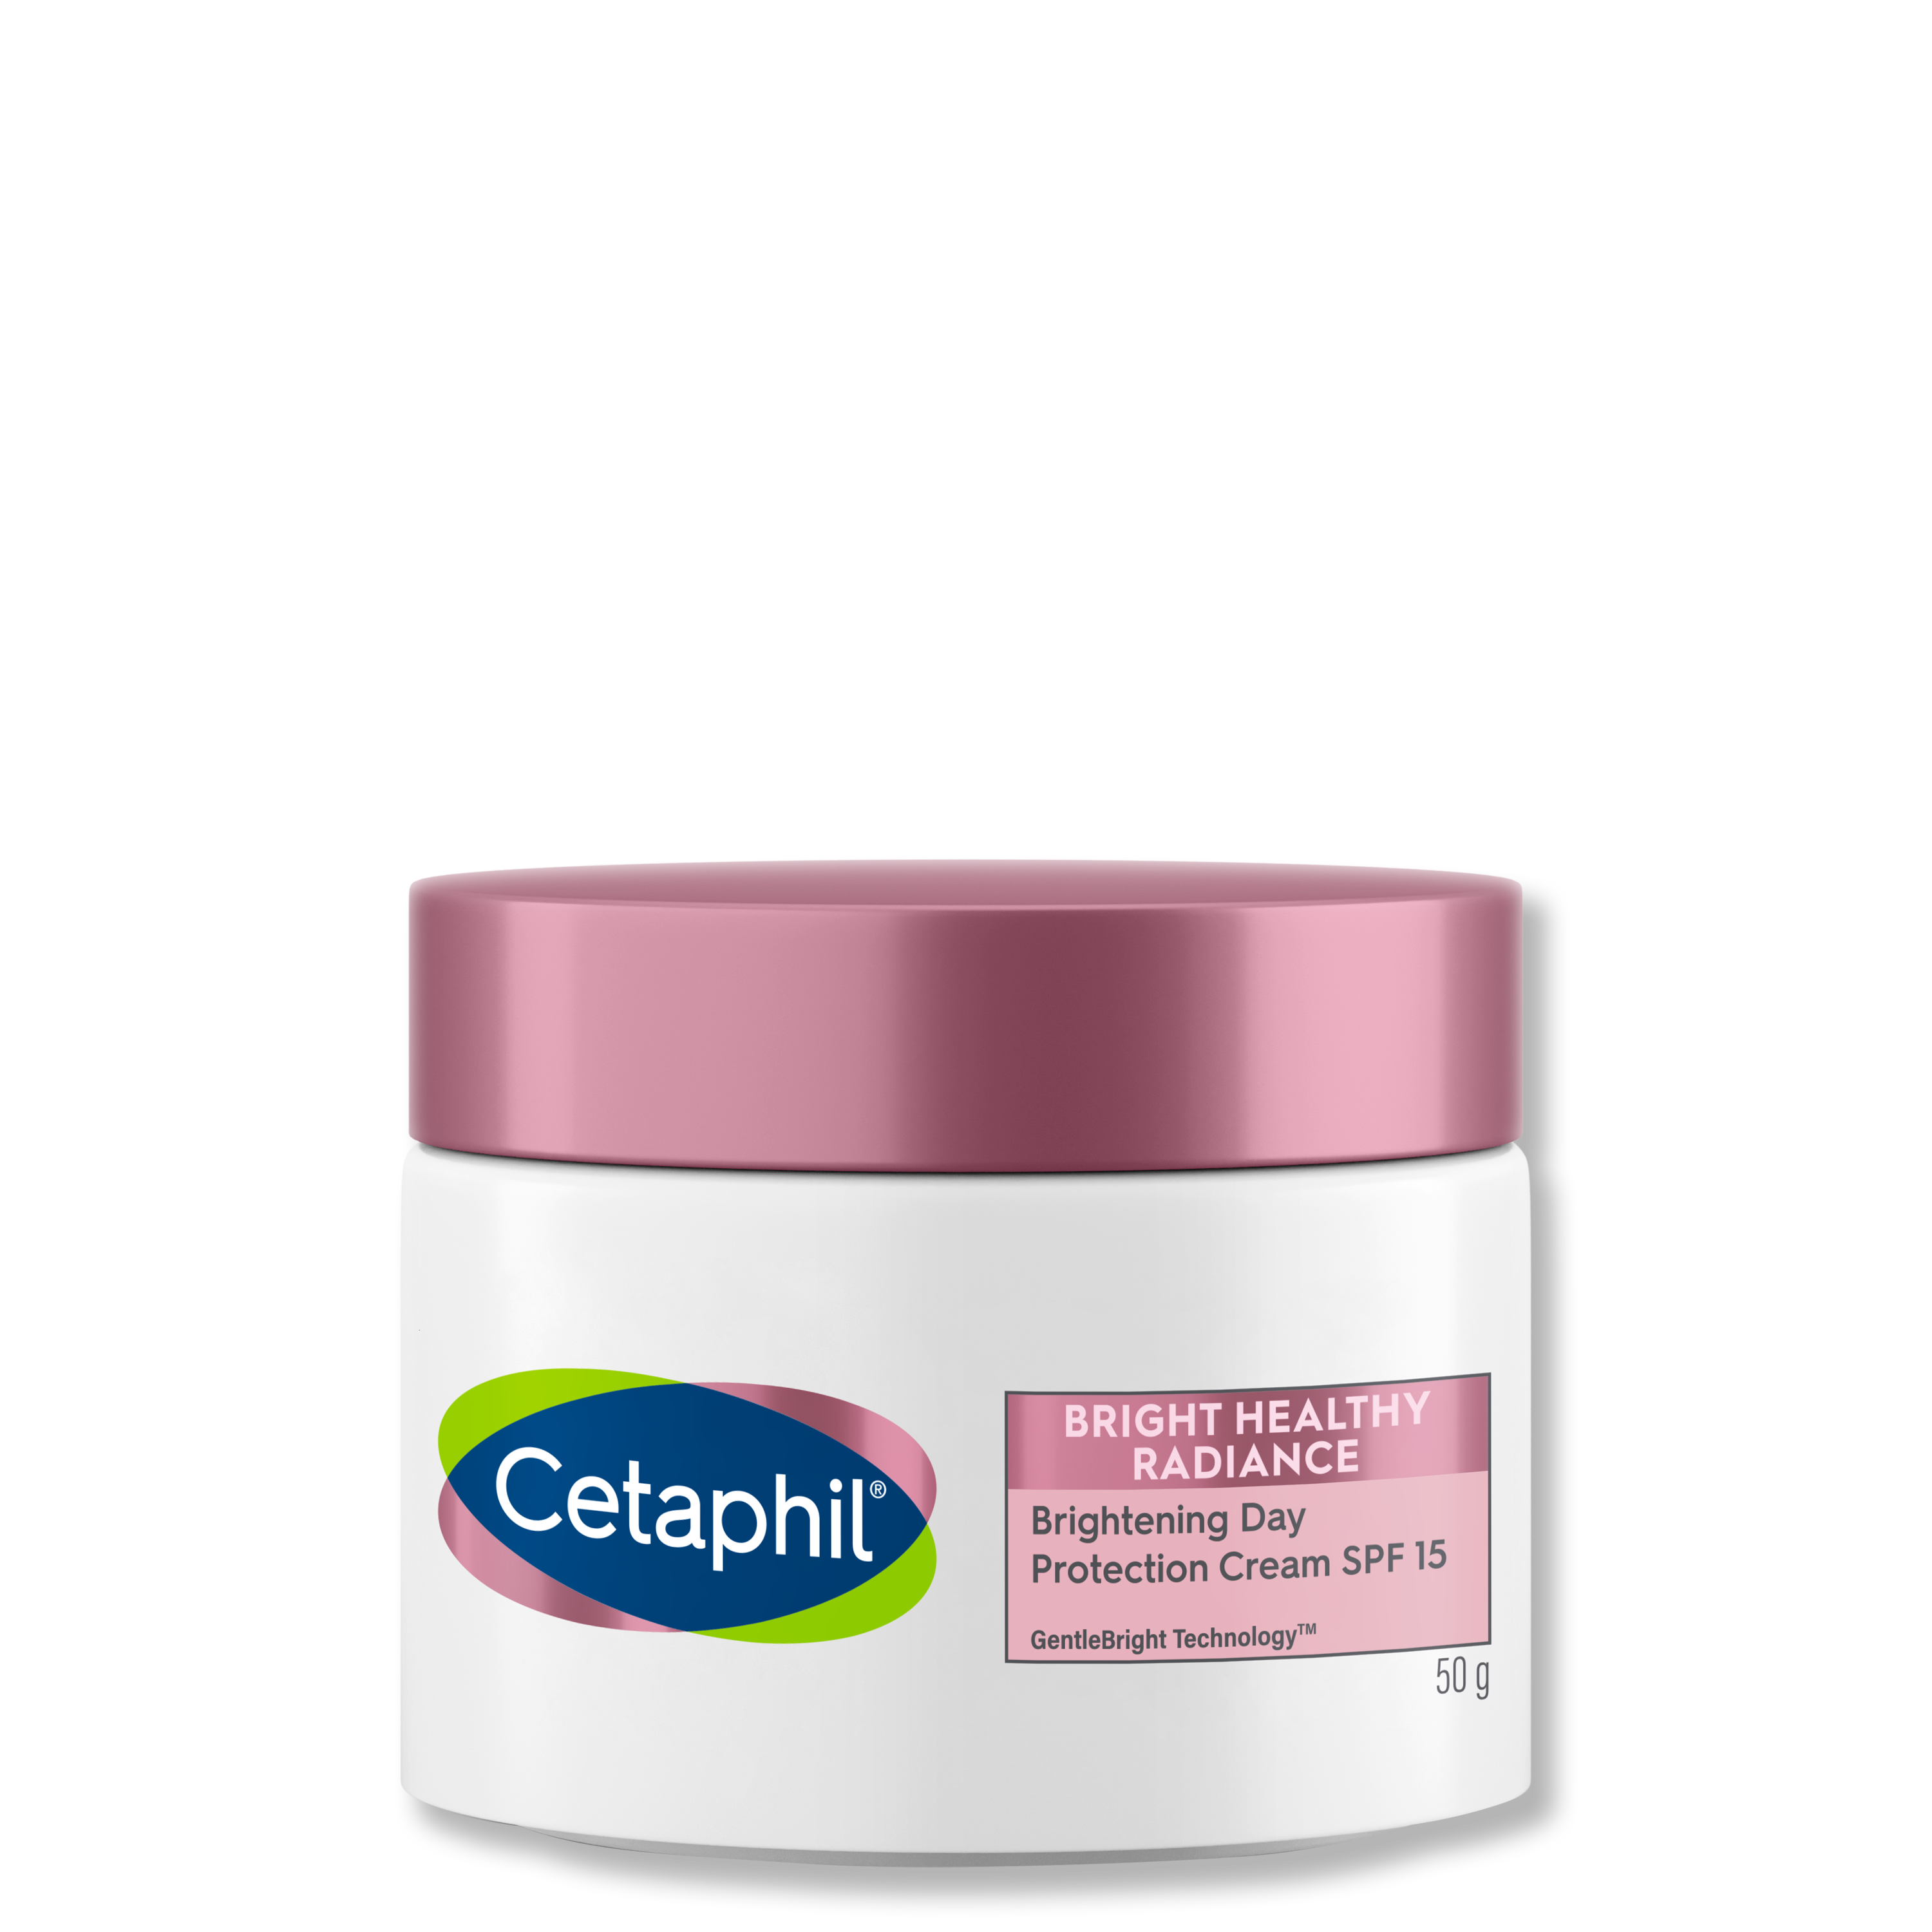 Cetaphil Bright Healthy Radiance Brightening Day Protection Cream SPF 15